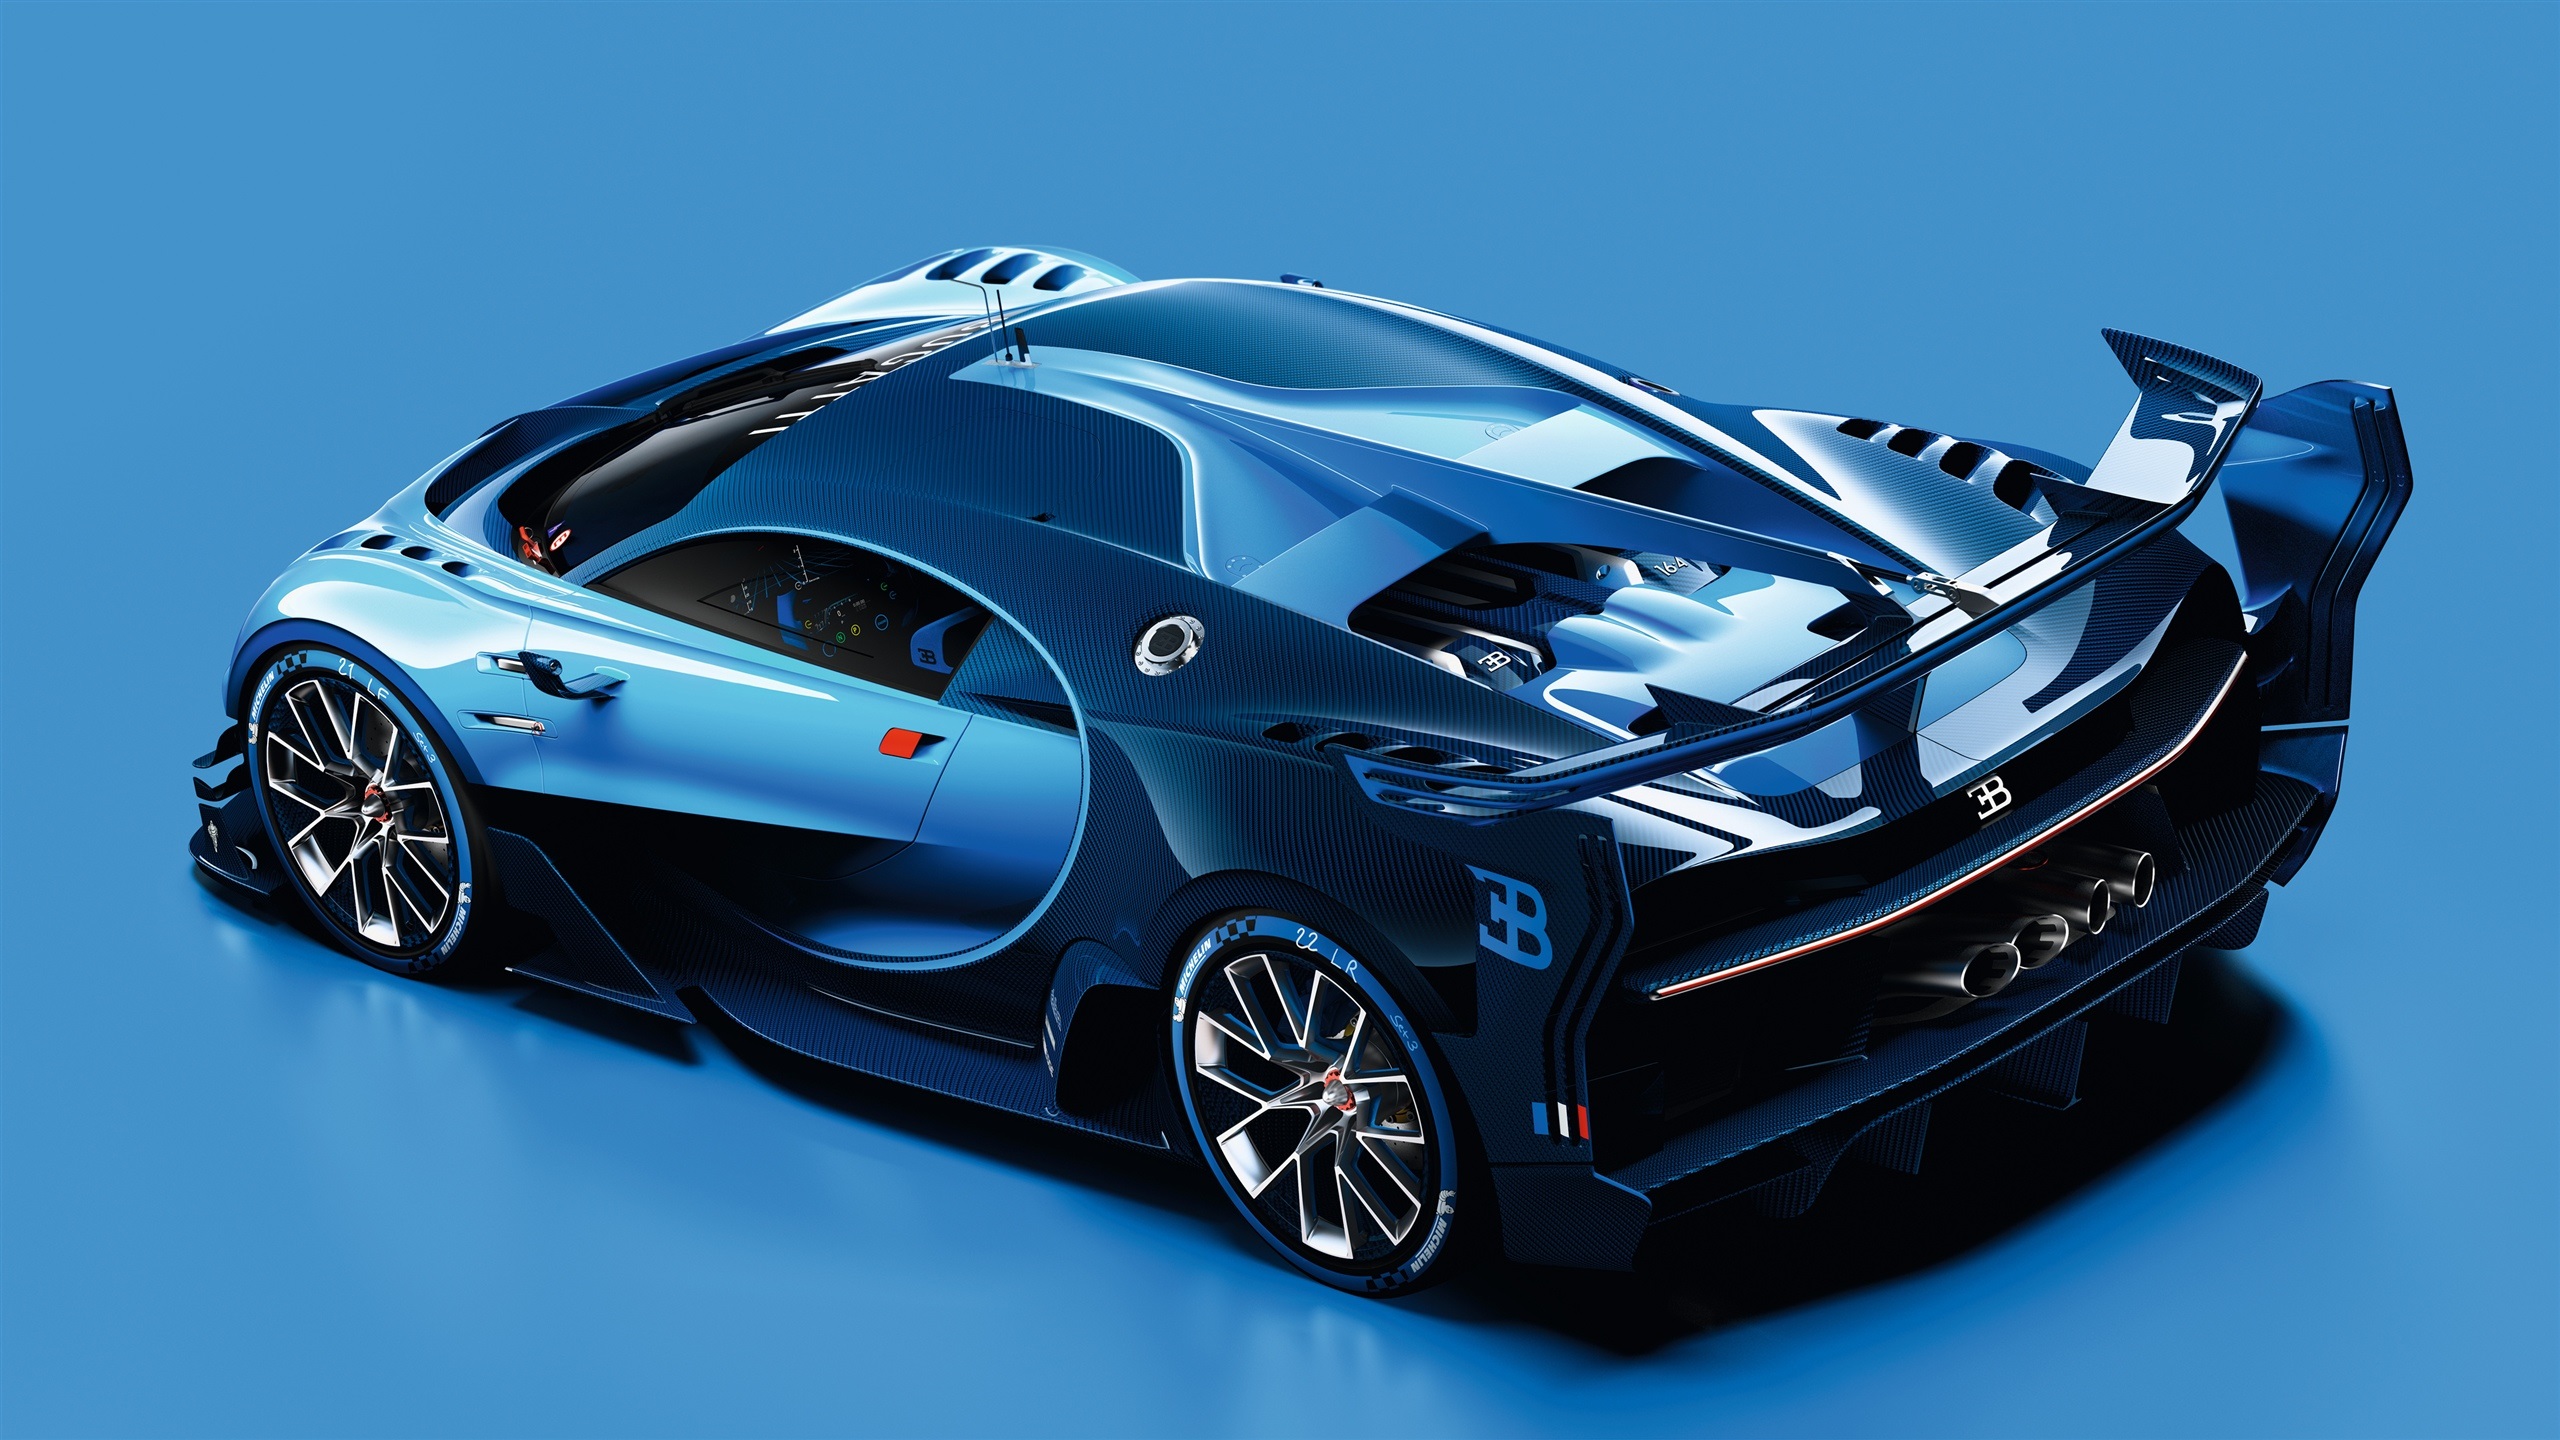 General 2560x1440 Bugatti blue cars vehicle car blue background French Cars Volkswagen Group Hypercar